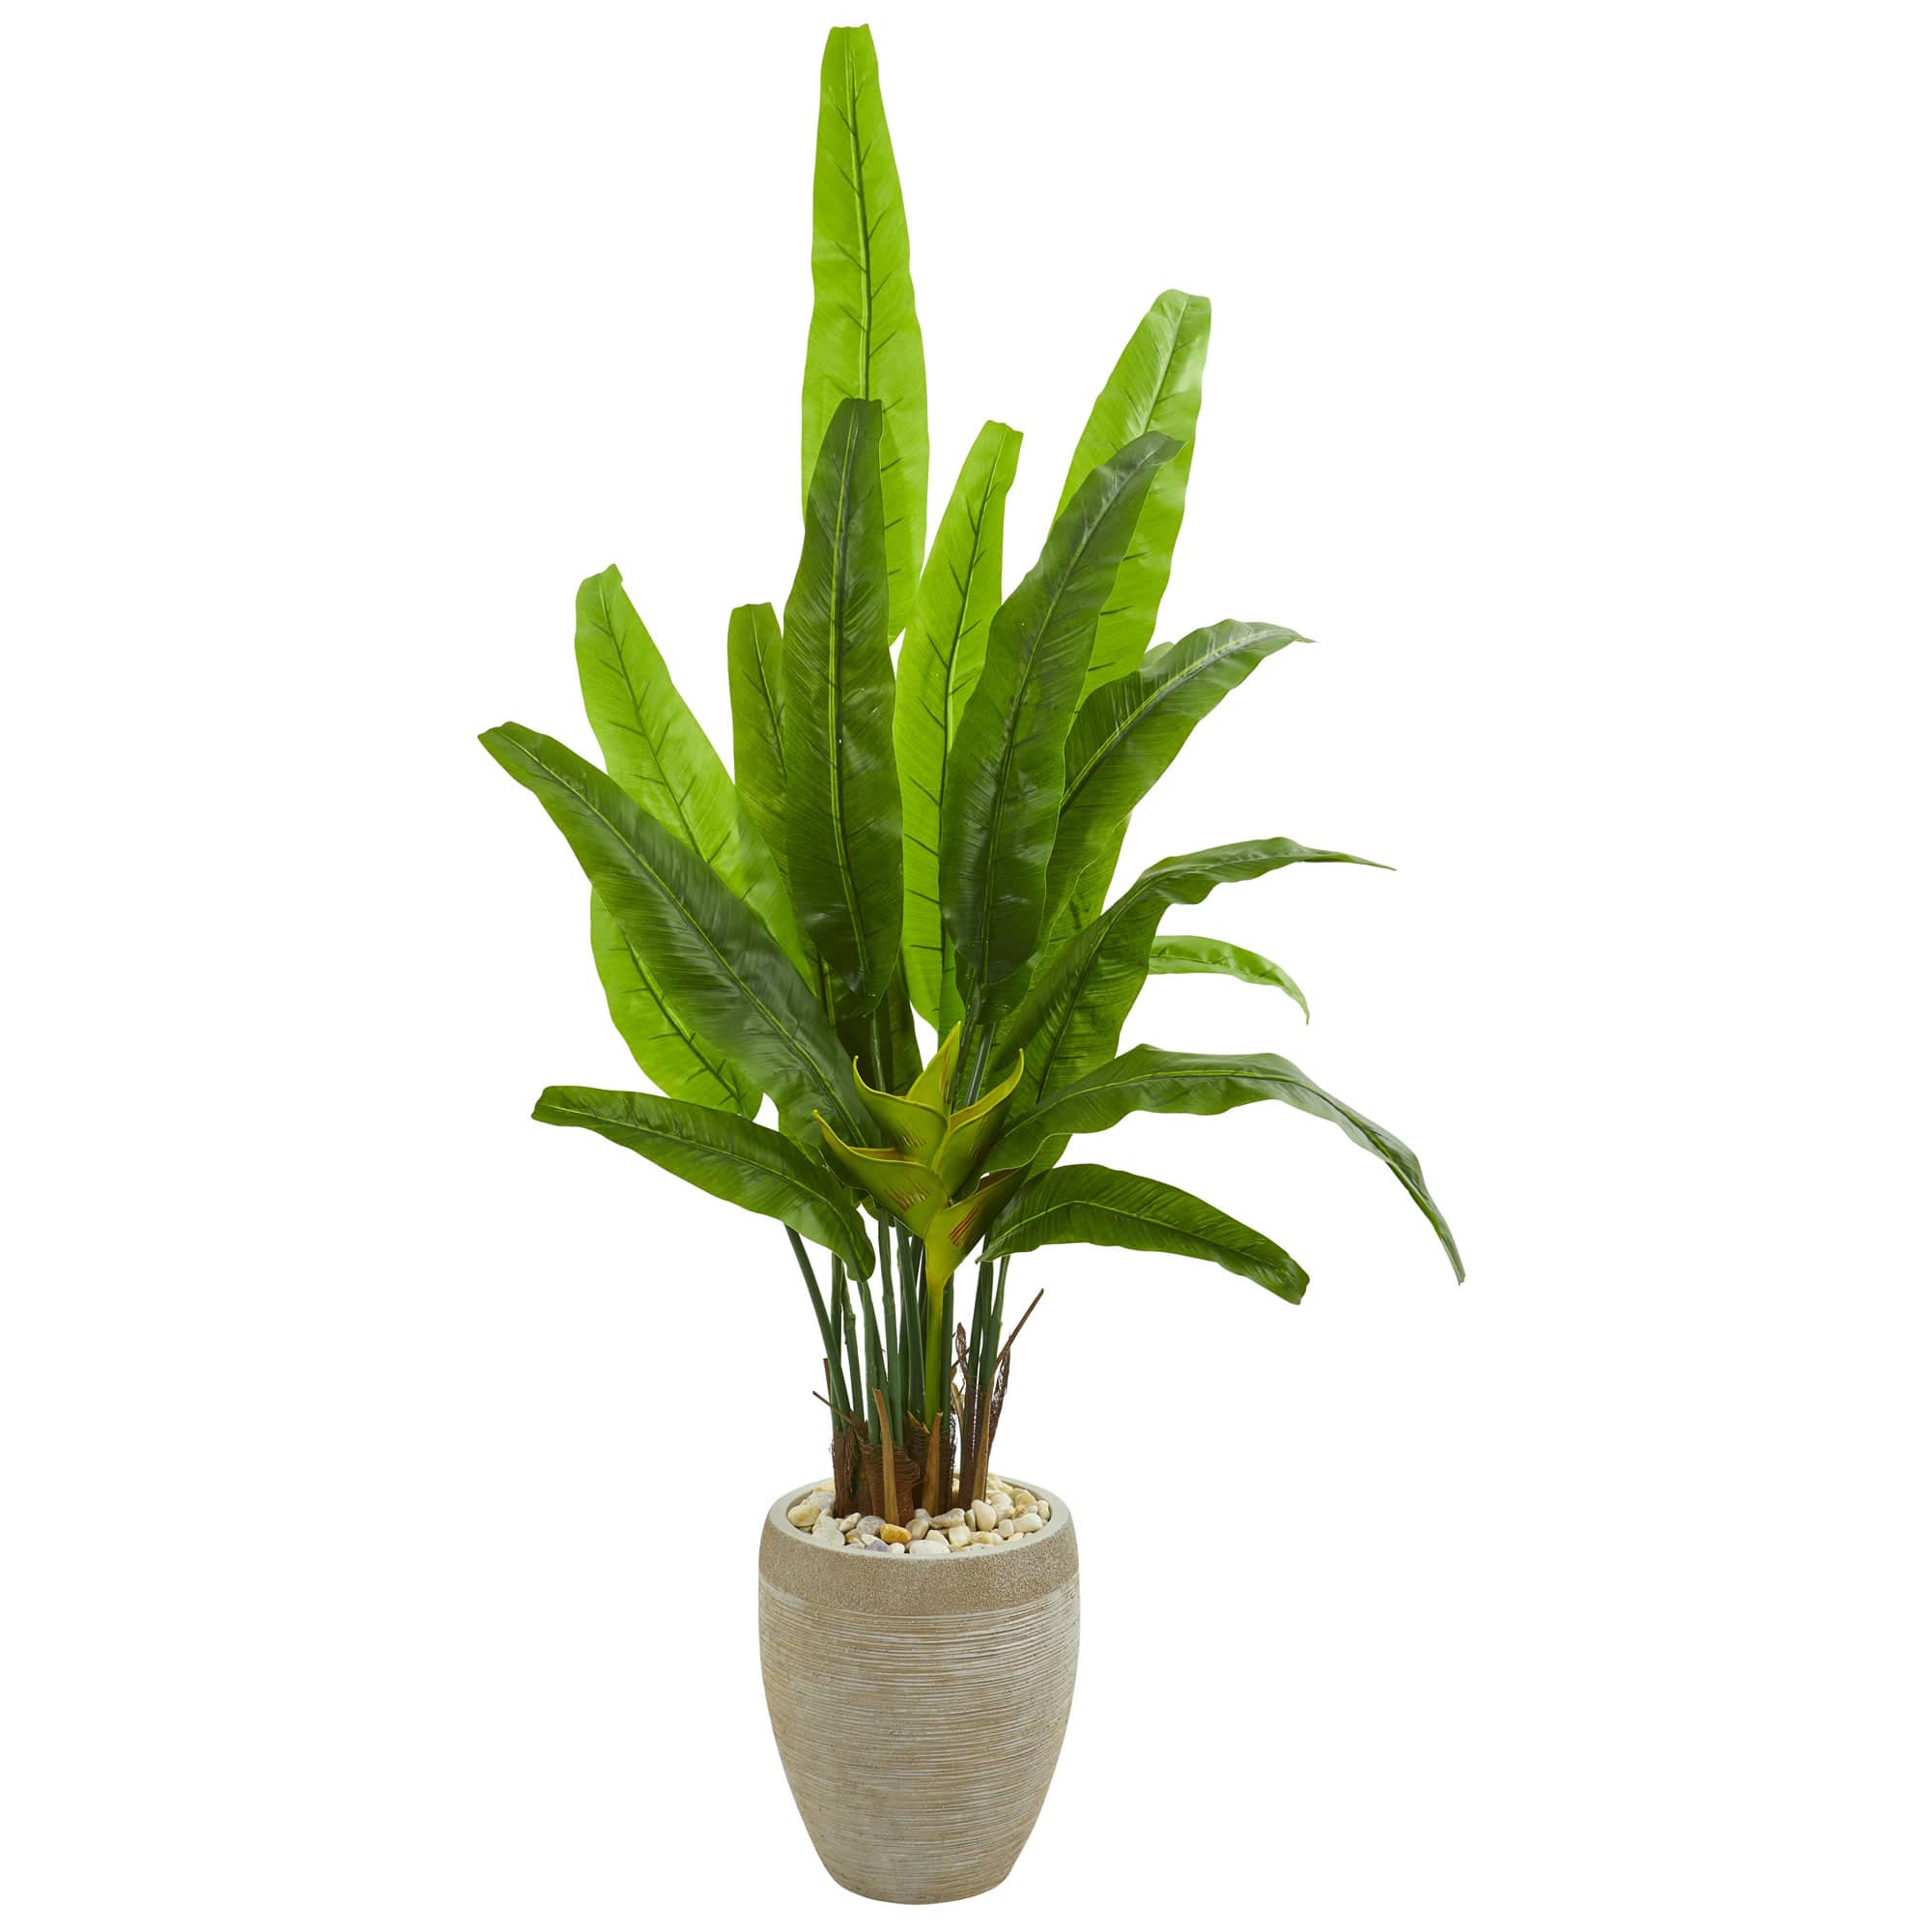 5.5ft. Travelers Palm Tree in Sand Colored Planter